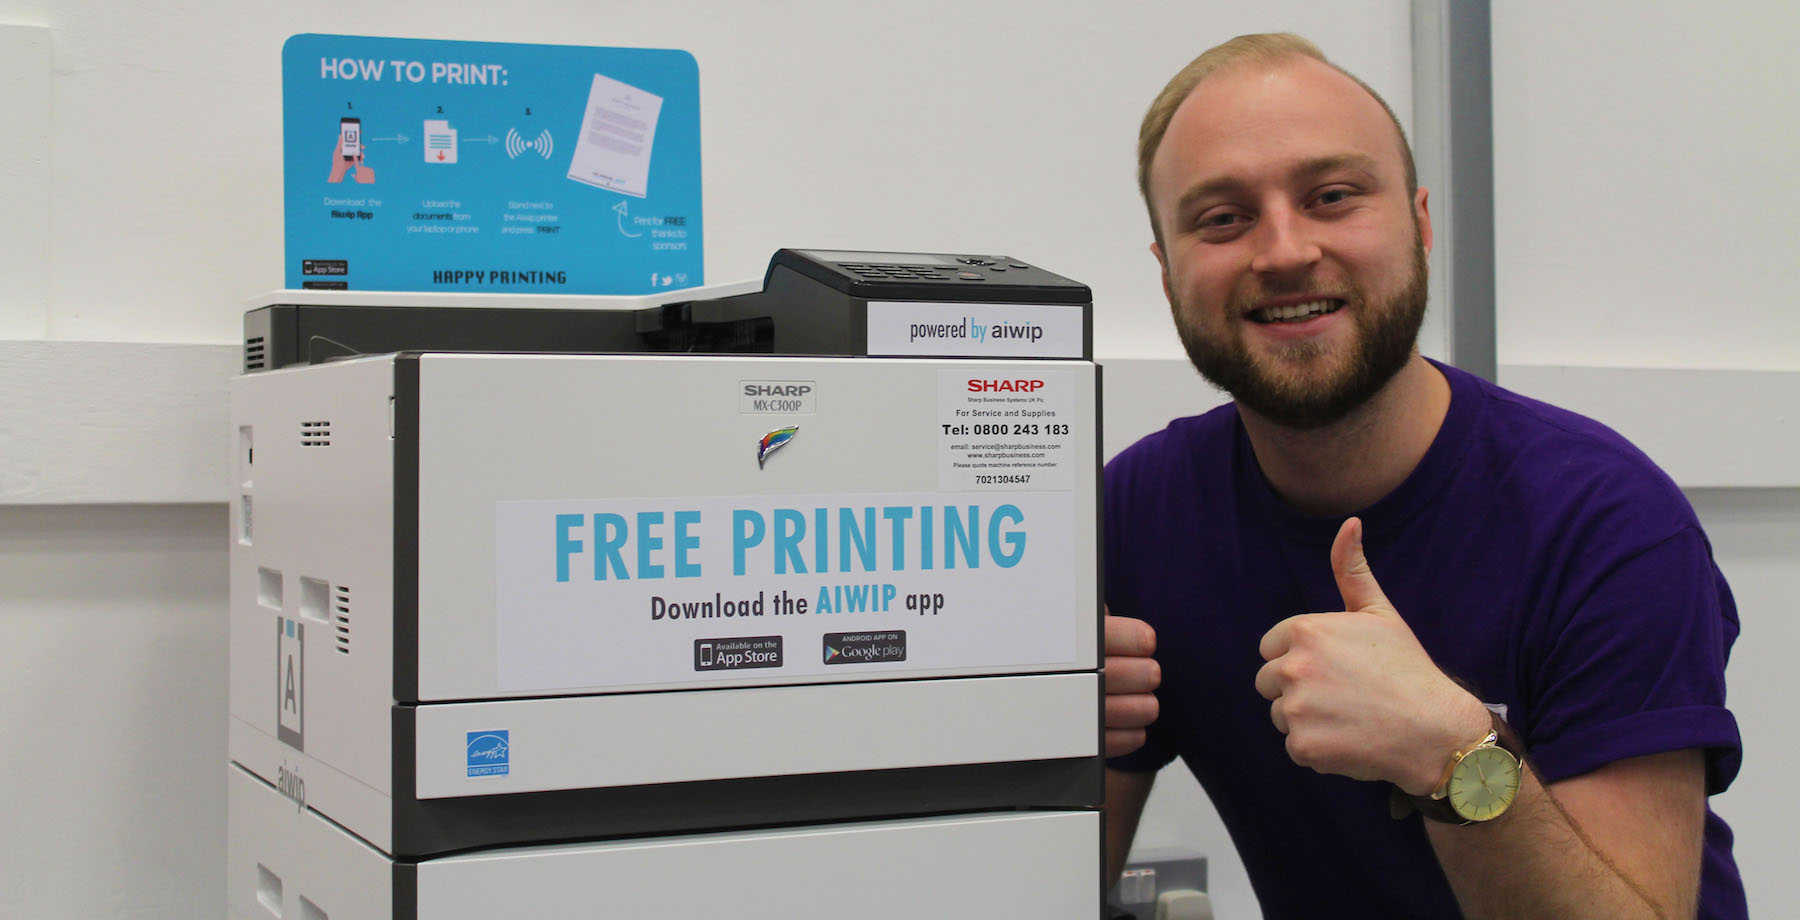 A student next to a prototype print station